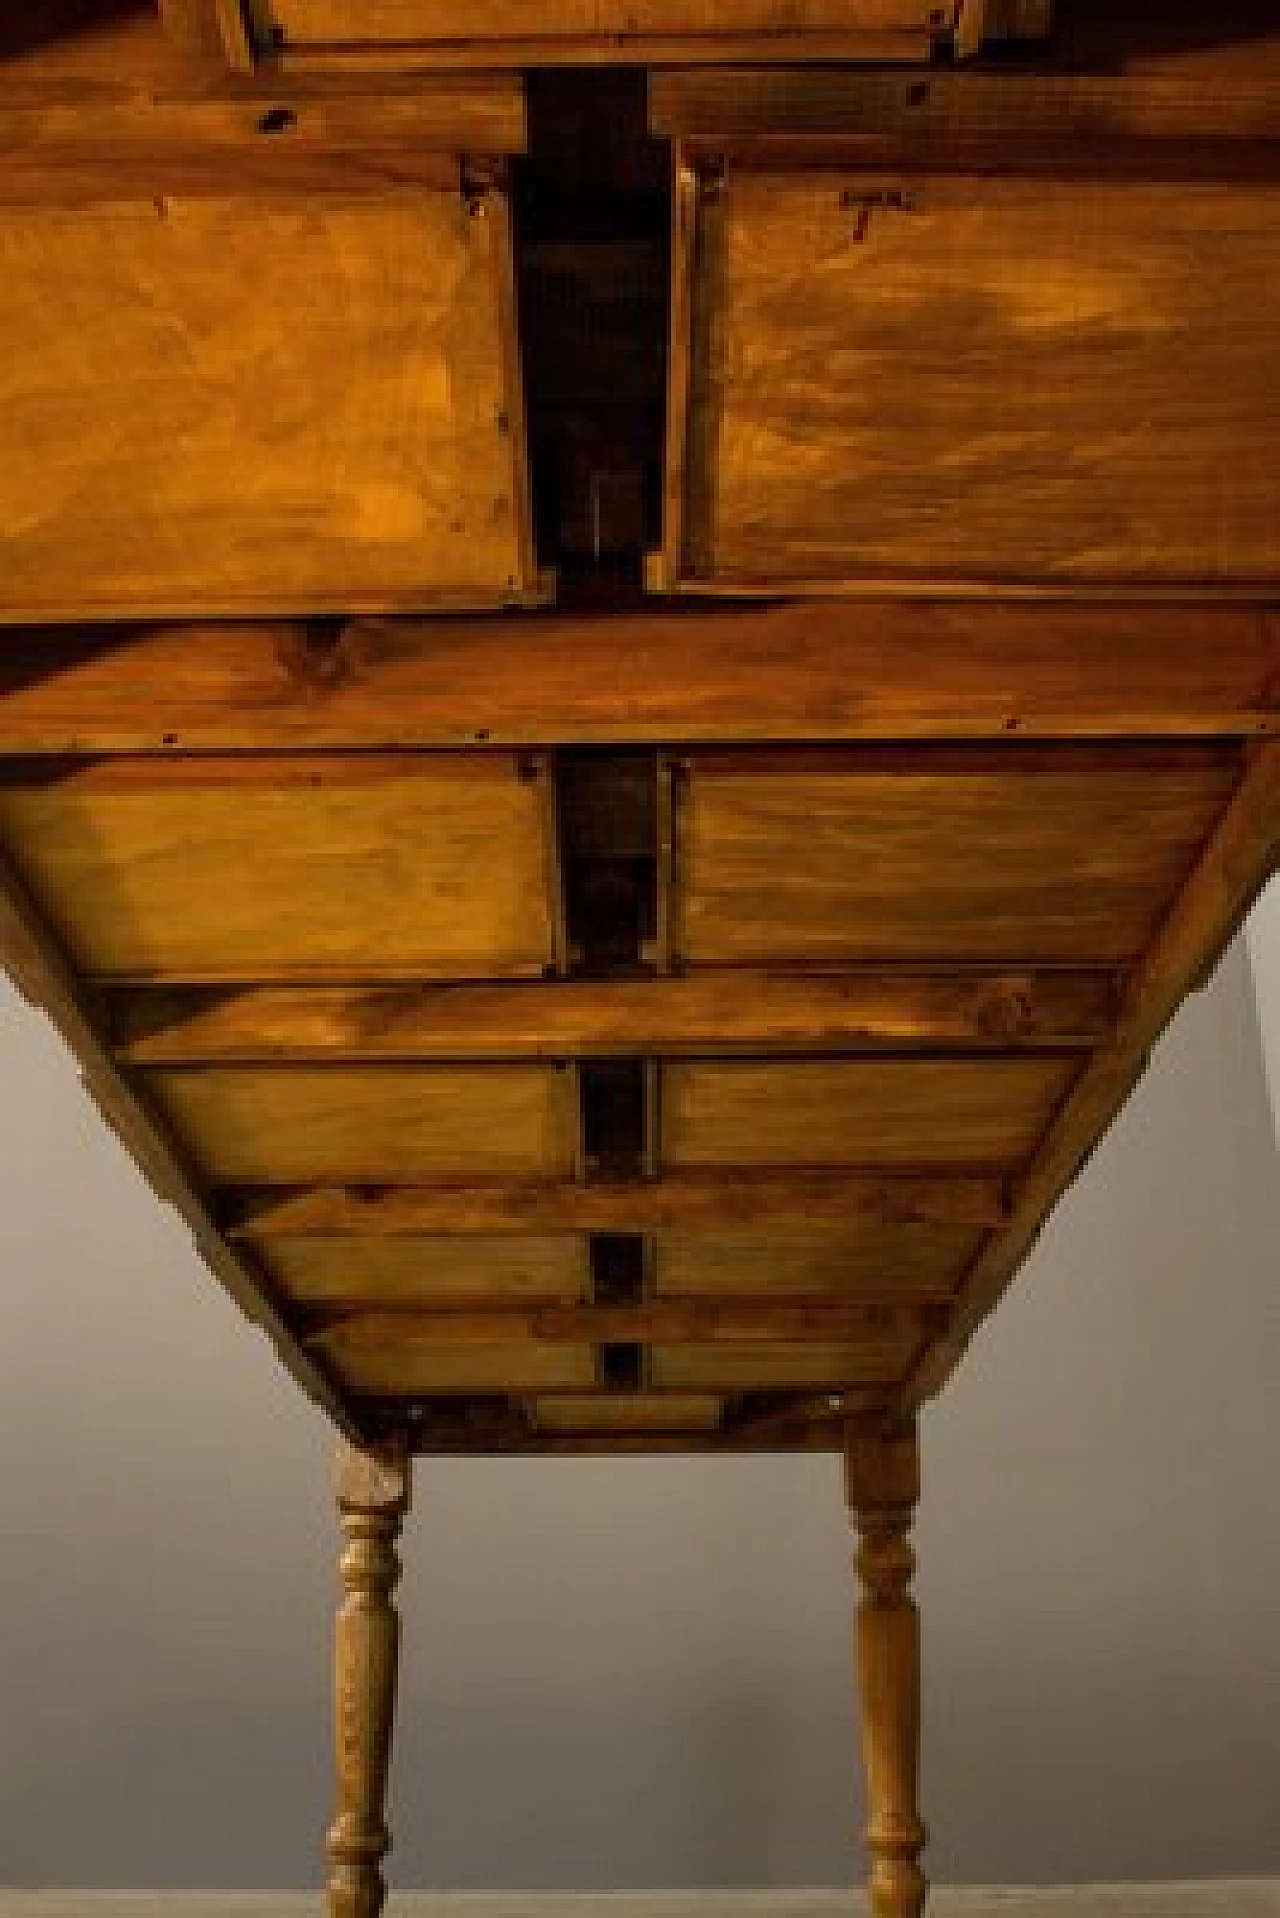 Handcrafted cedar table with 12 drawers, '2000 6